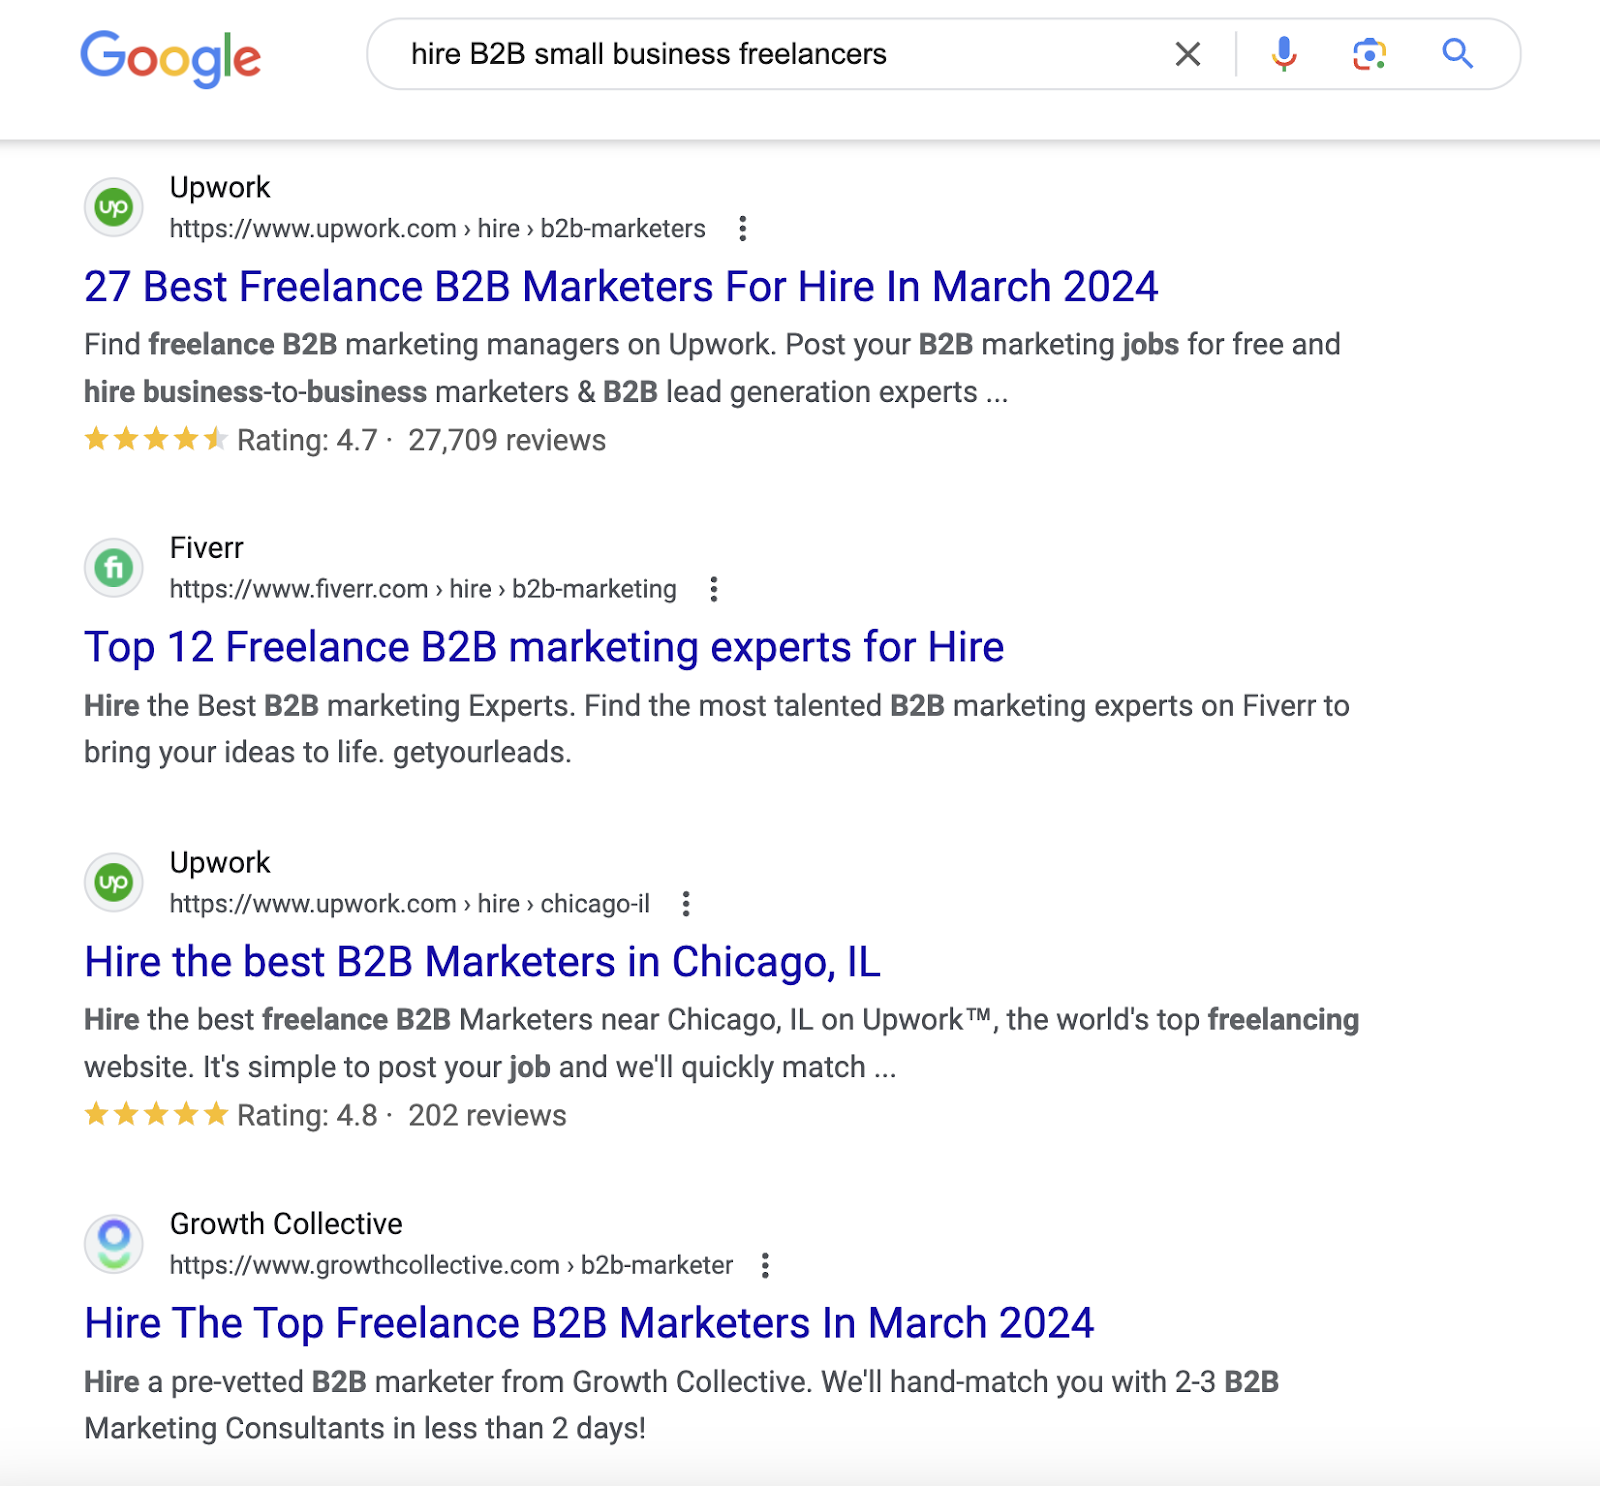 A Google search for “hire B2B small business freelancers” returns a variety of freelancer marketplaces and agencies for outsourcing writing.